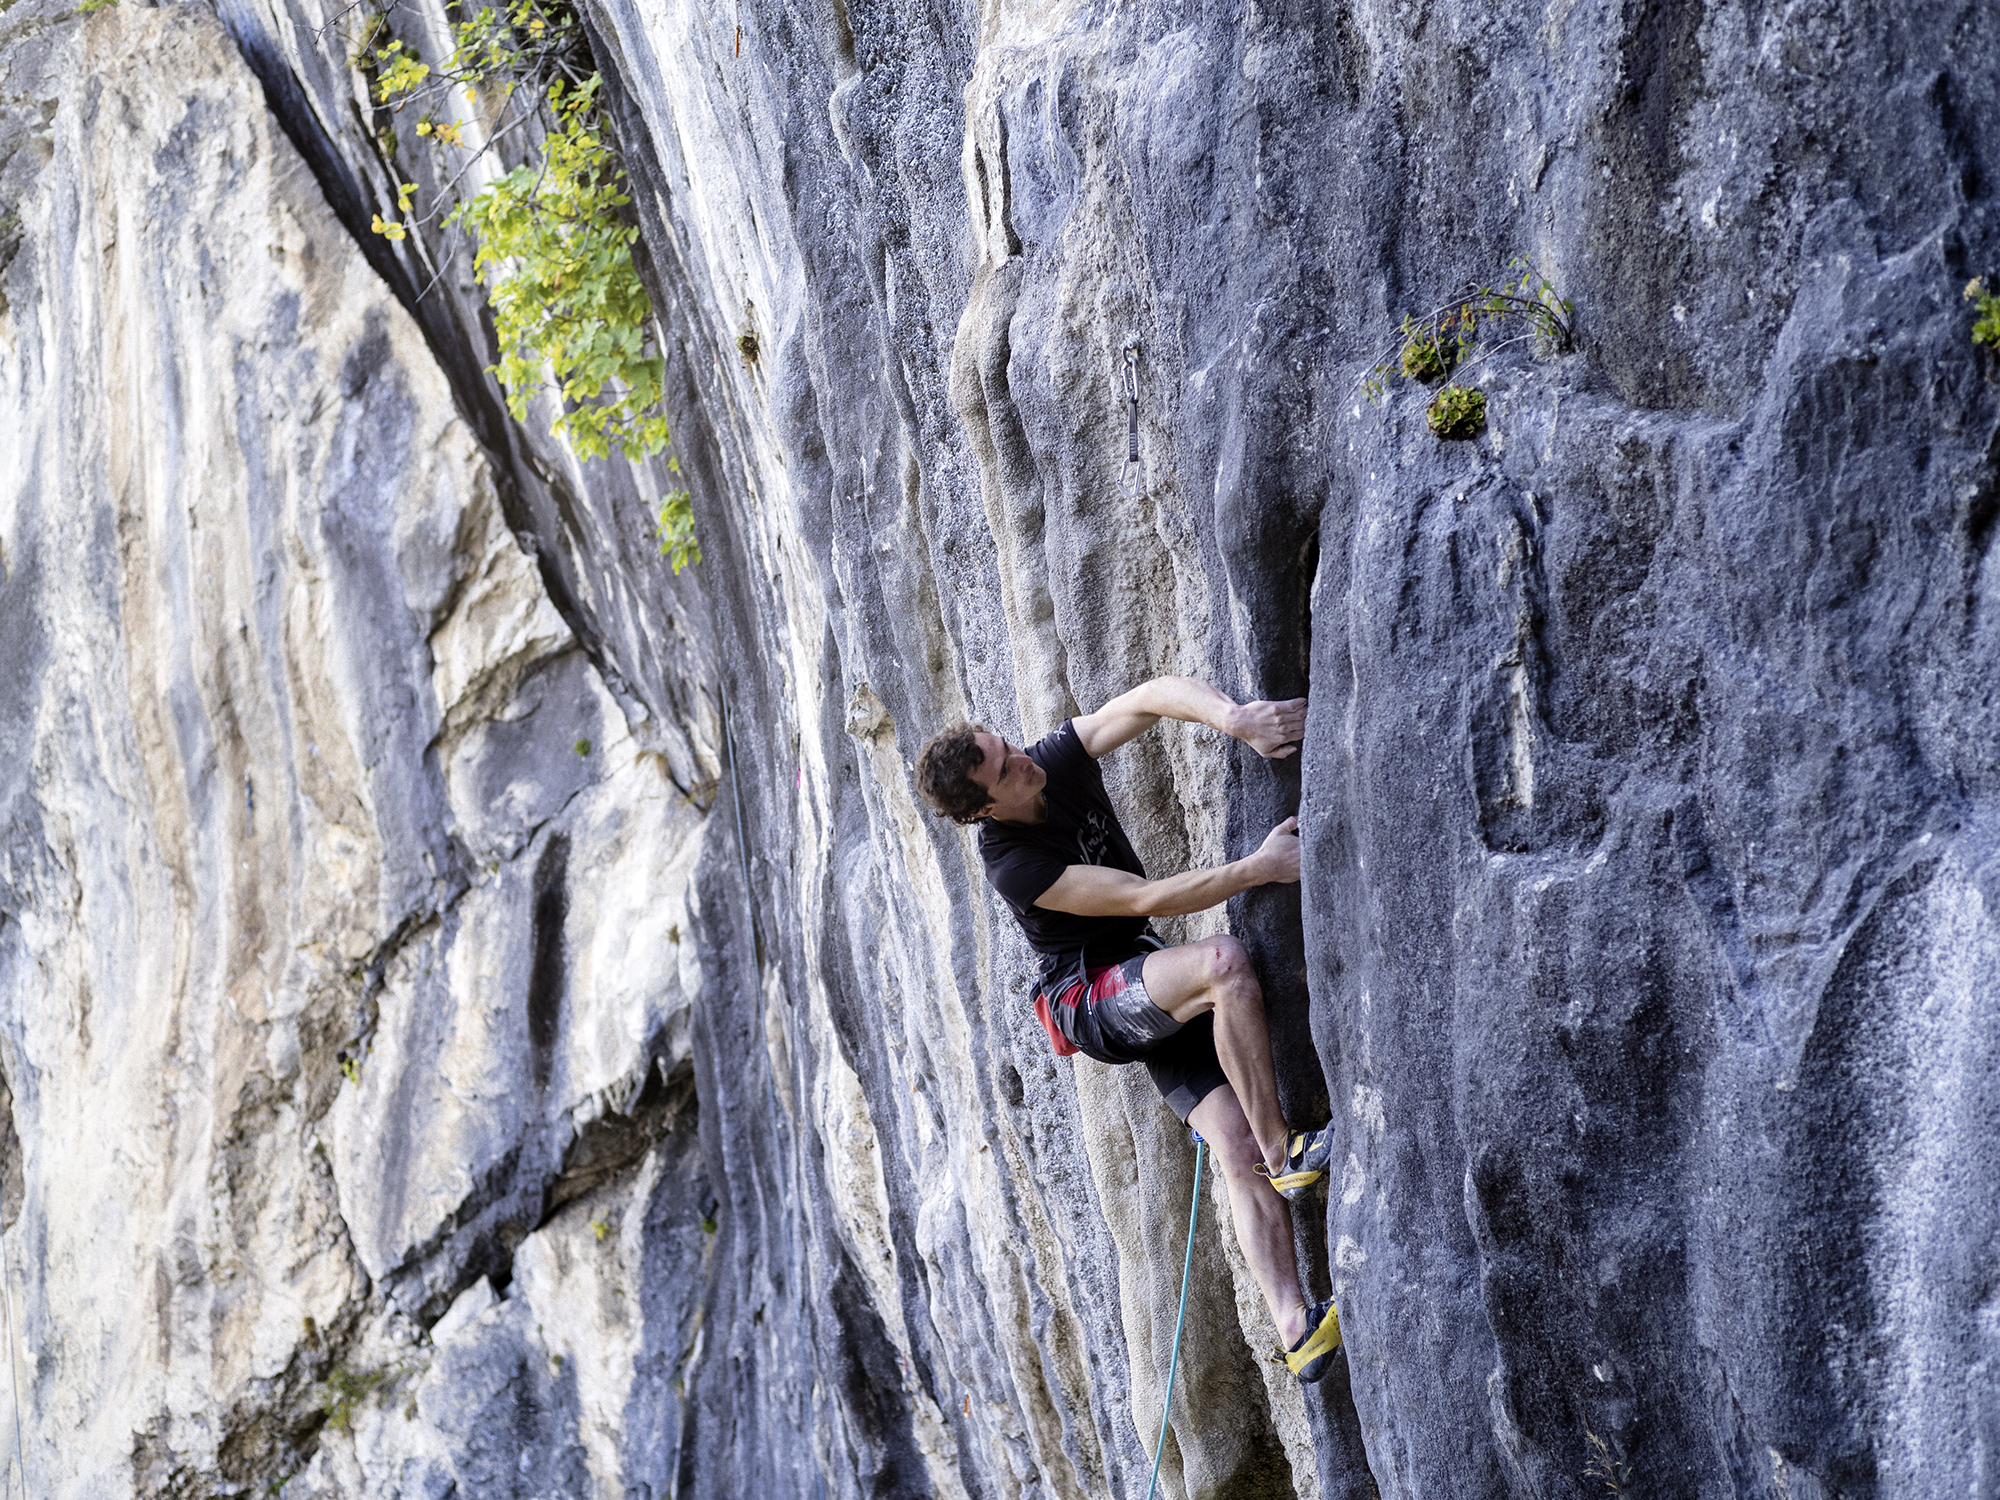 III. Benefits of Sport Climbing for Physical and Mental Health